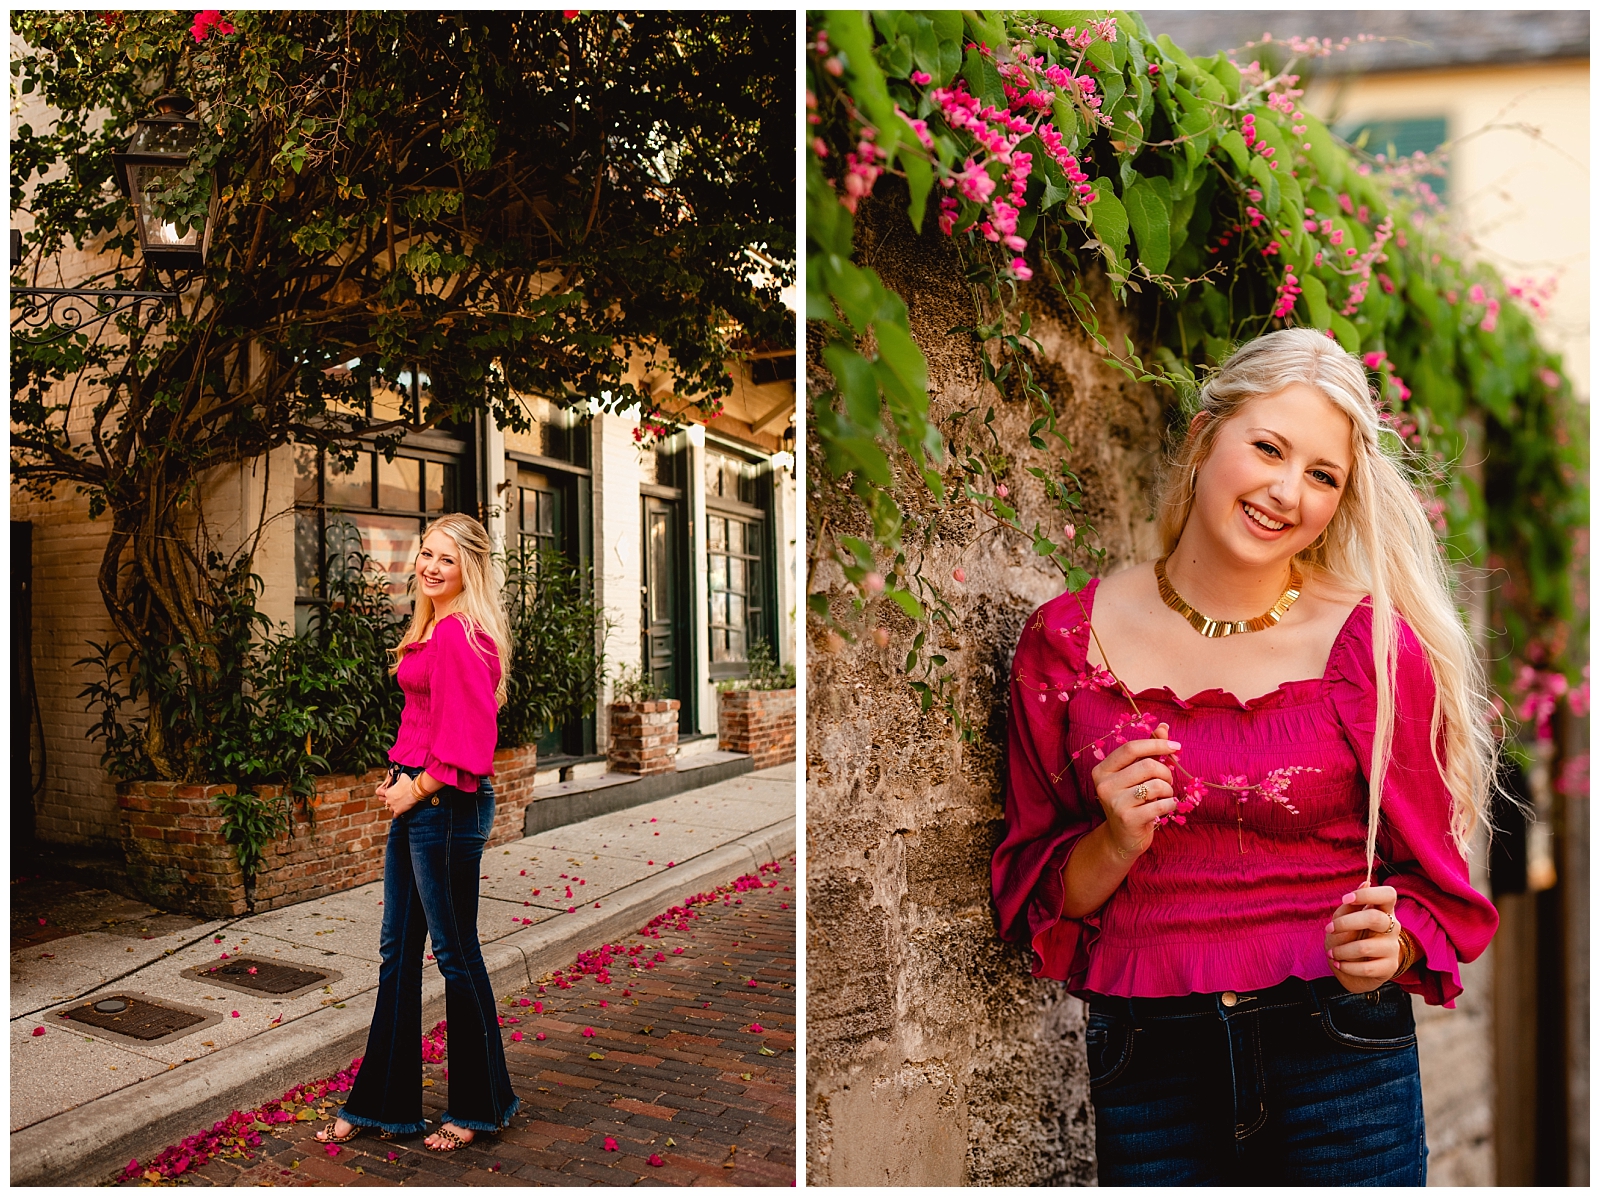 Downtown St Augustine street for senior portraits. Senior photo outfit ideas, hot pink shirt with cheetah heels.